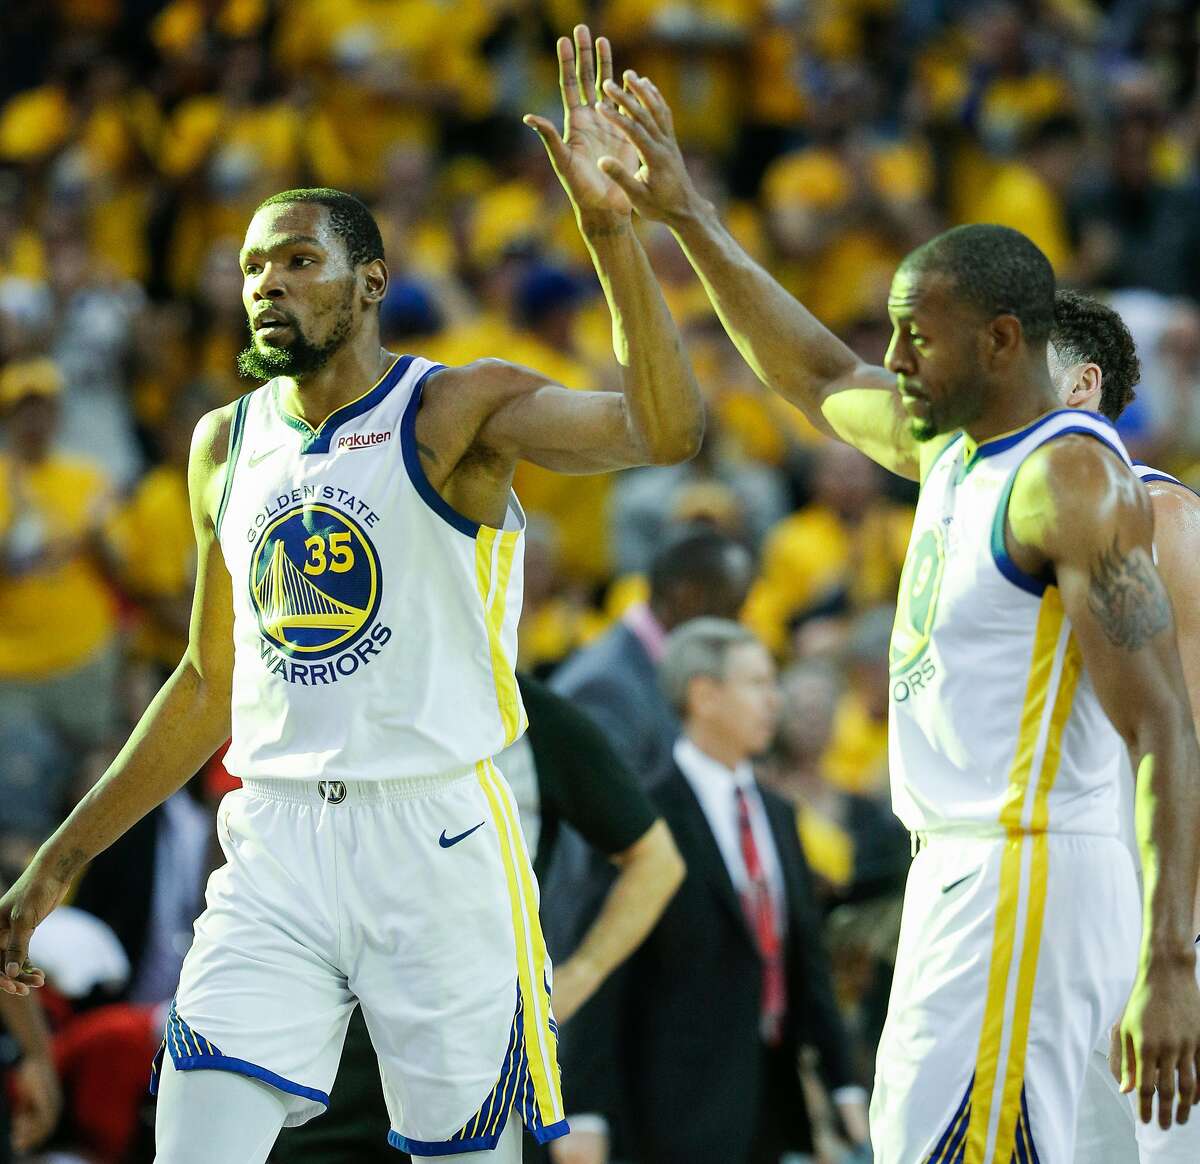 Golden State Warriors Kevin Durant gets a high five from Andre Iguodala in the third quarter during game 1 of the Western Conference Semifinals between the Golden State Warriors and the Houston Rockets at Oracle Arena on Sunday, April 28, 2019 in Oakland. The Warriors paid tribute to Durant and Iguodala, who both are no longer with the team, with videos they posted to social media on Wednesday.